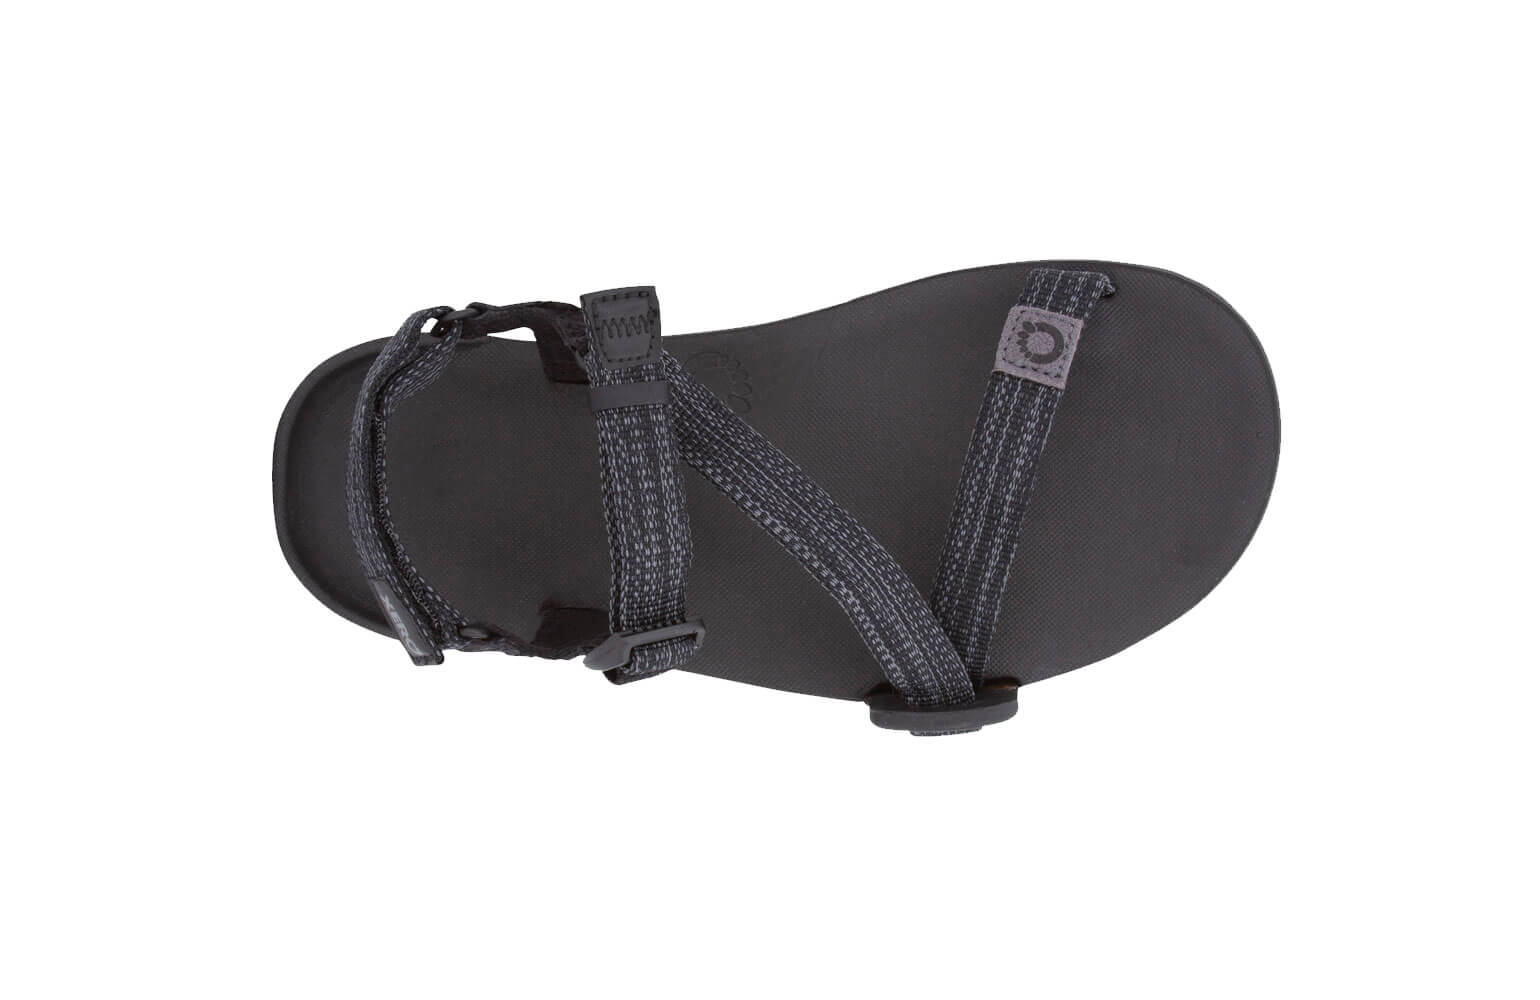 Sport Sandals for Kids - Z-Trail by Xero Shoes